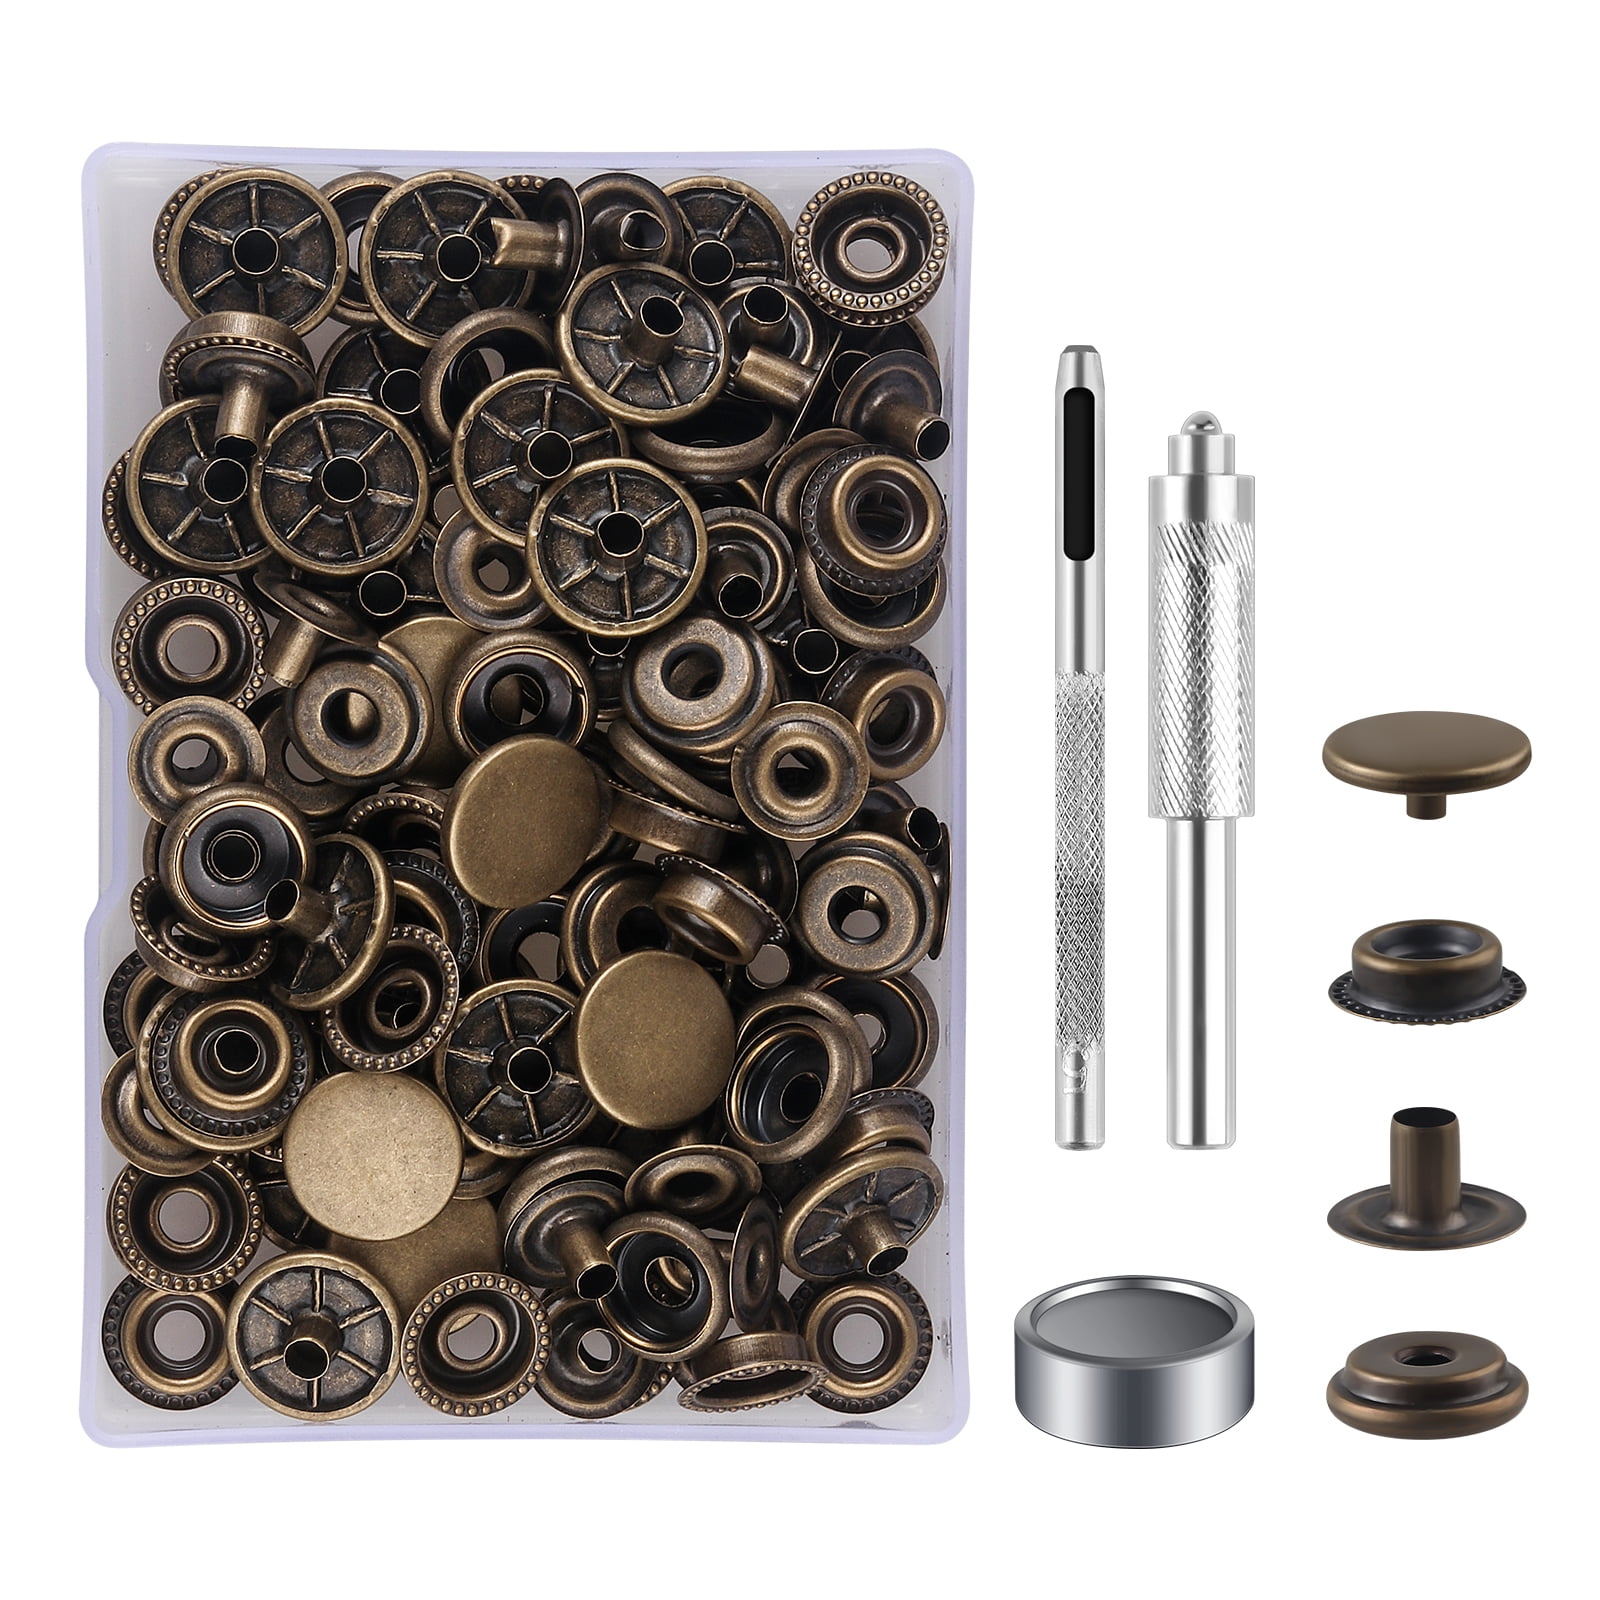 metal buttons, snap fasteners, press buttons